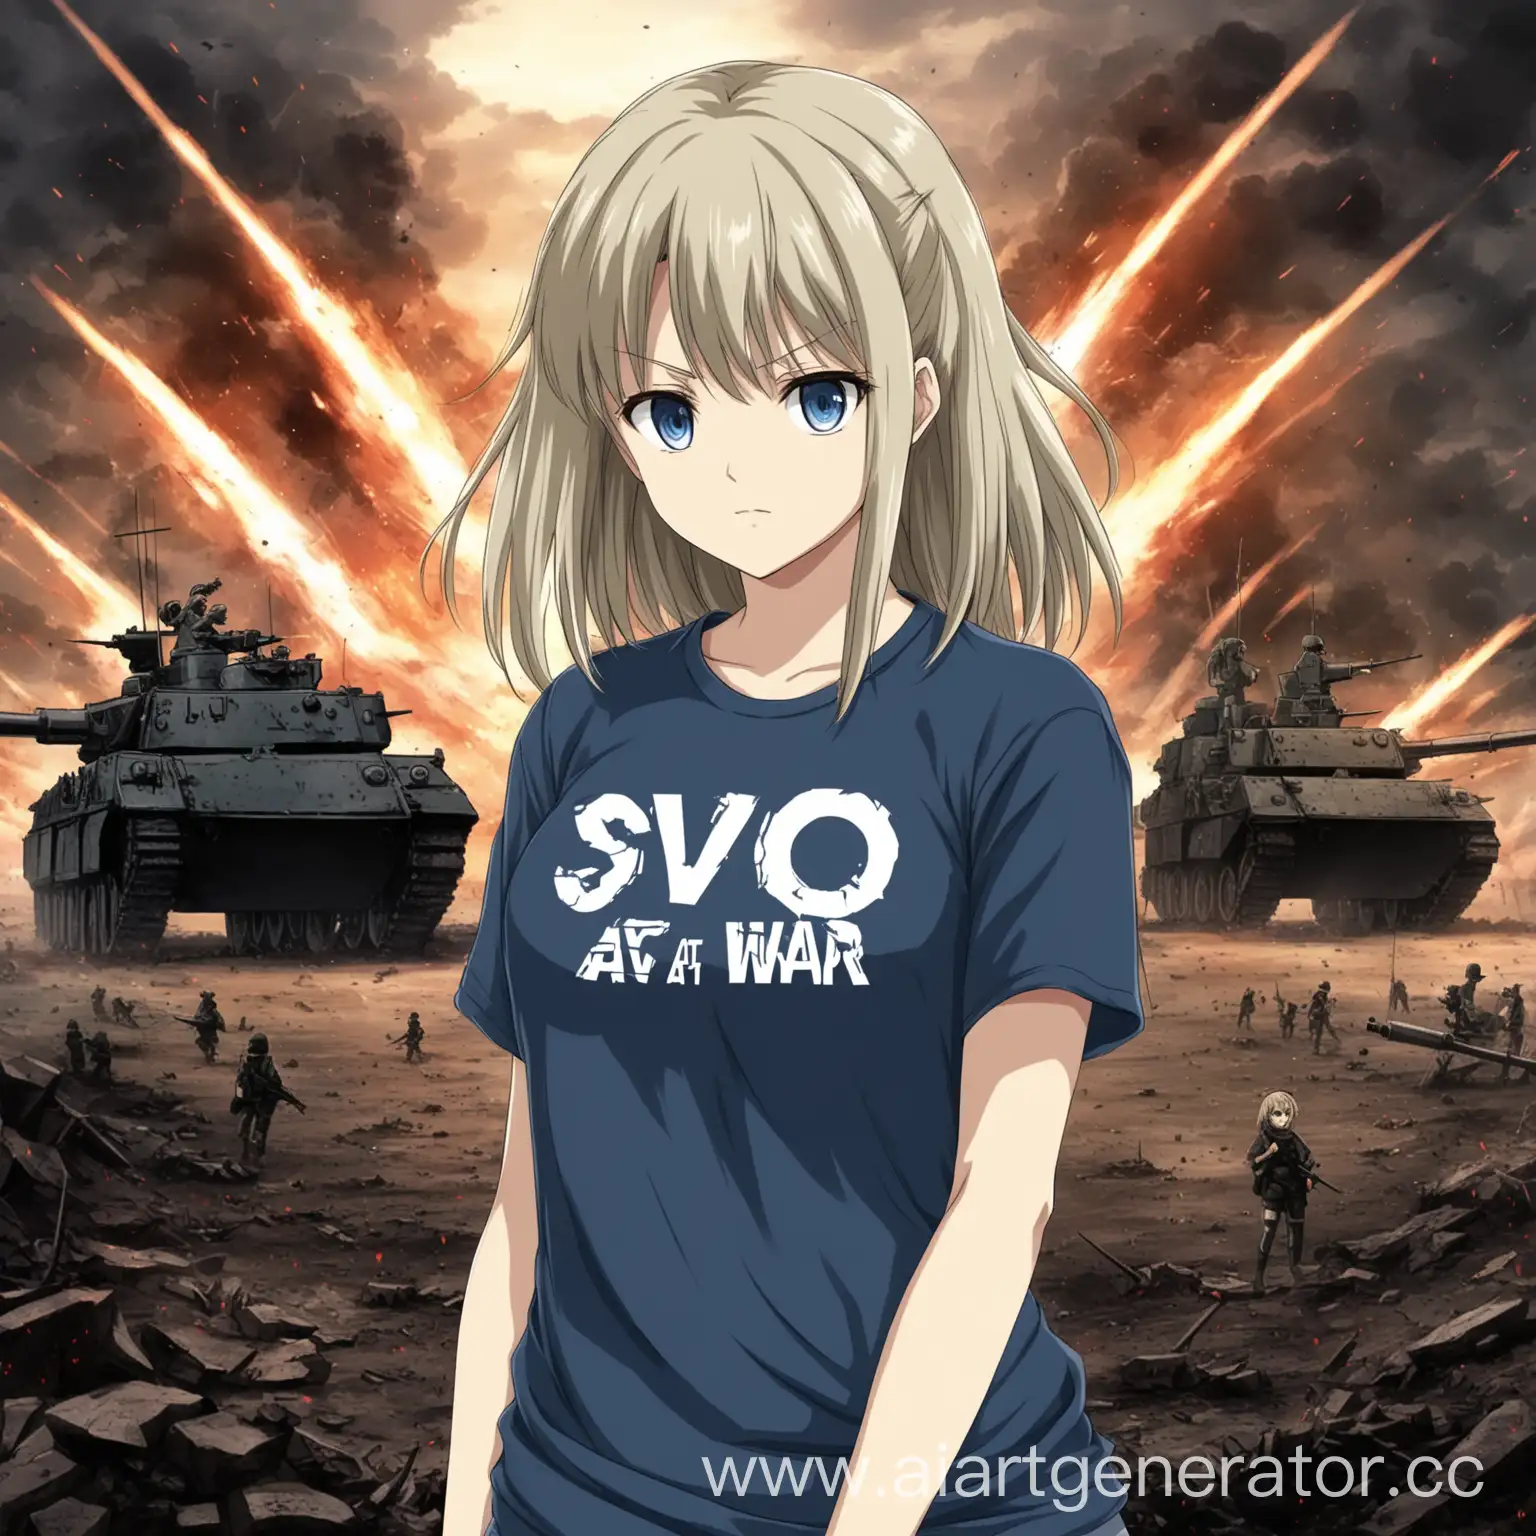 Anime-Girl-in-SVO-TShirt-Engaged-in-Battle